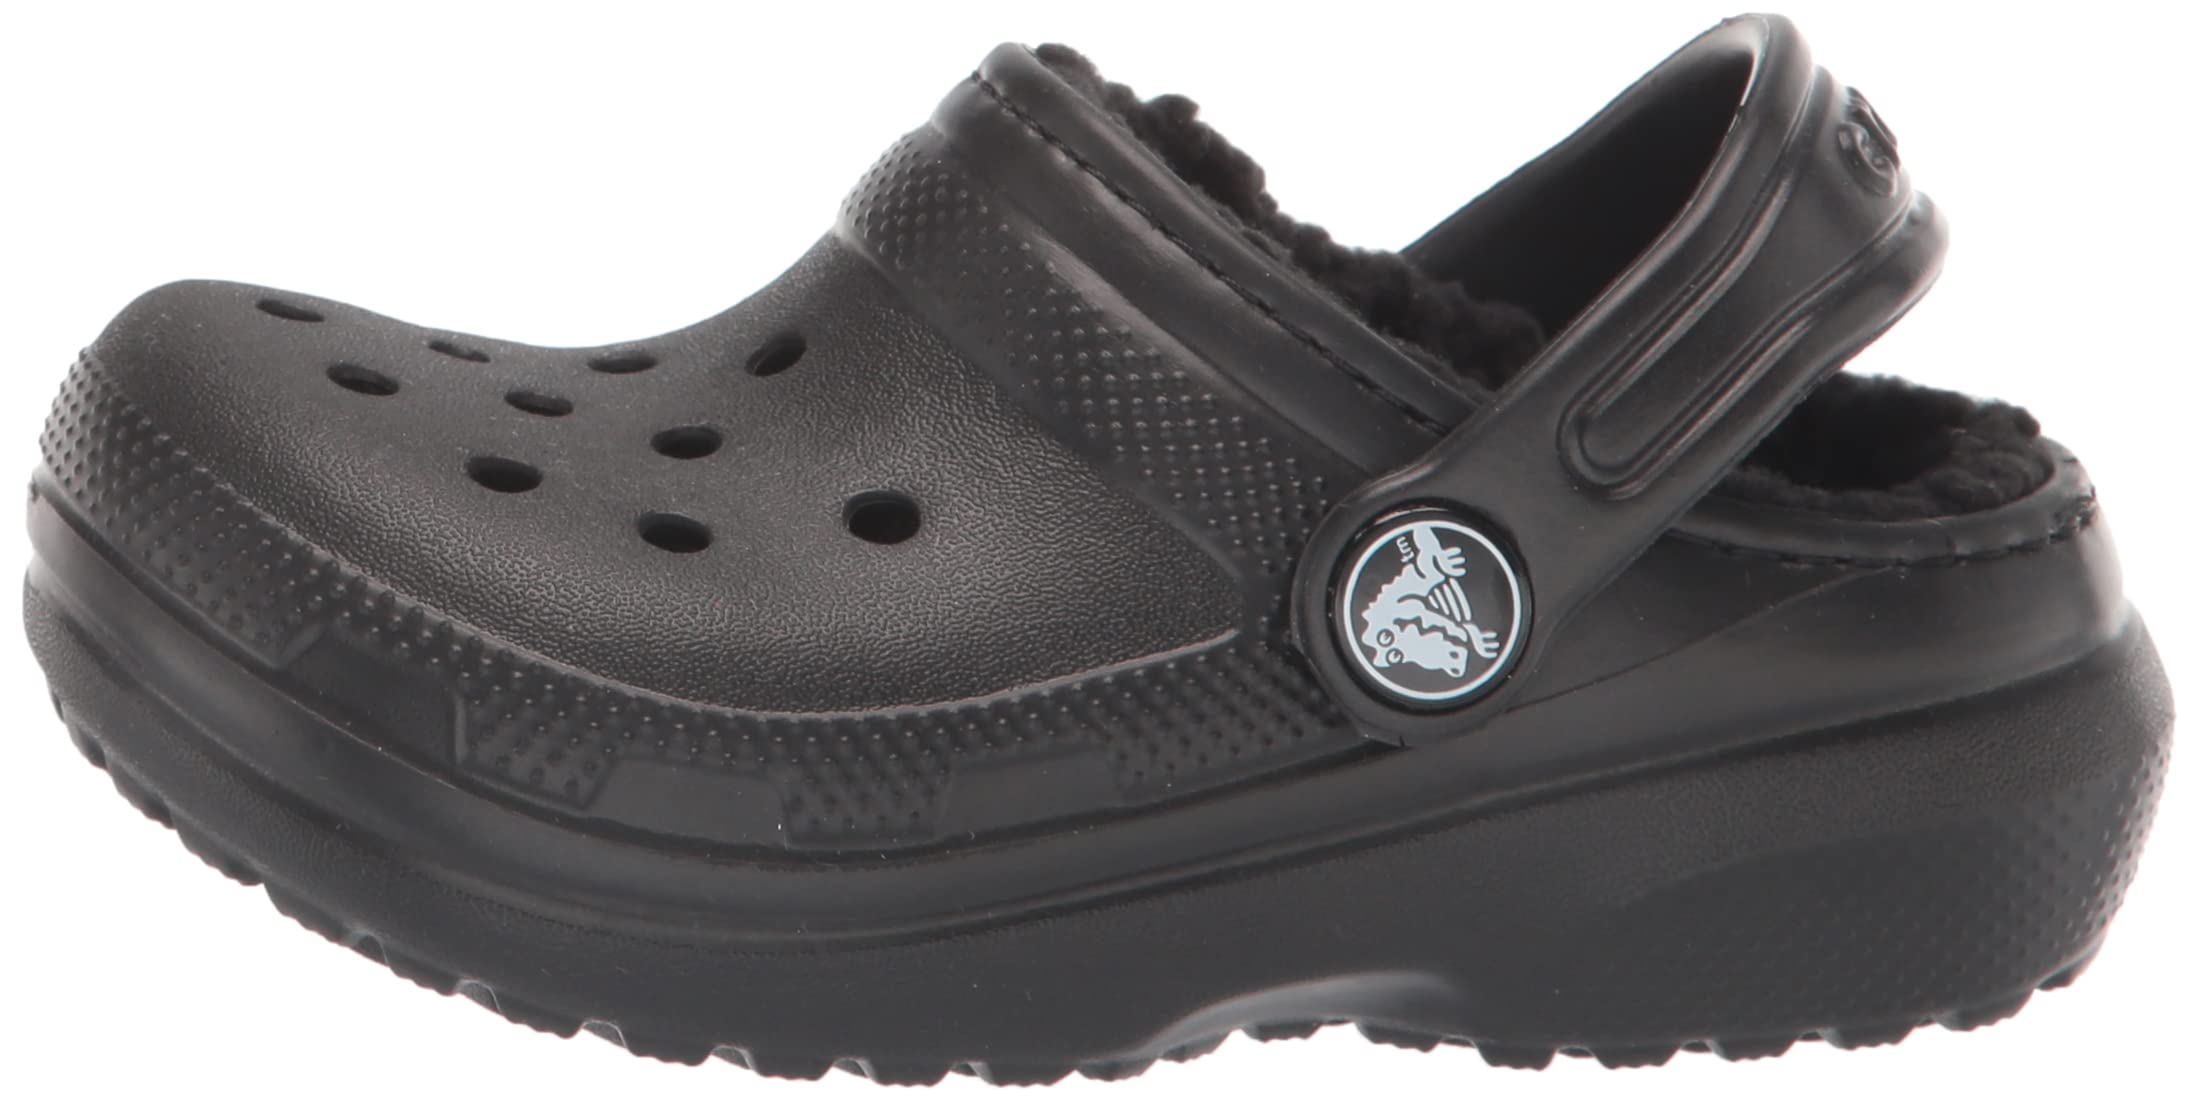 Crocs Unisex-Child Kids' Classic Lined Clog | Girls and Boys Slippers